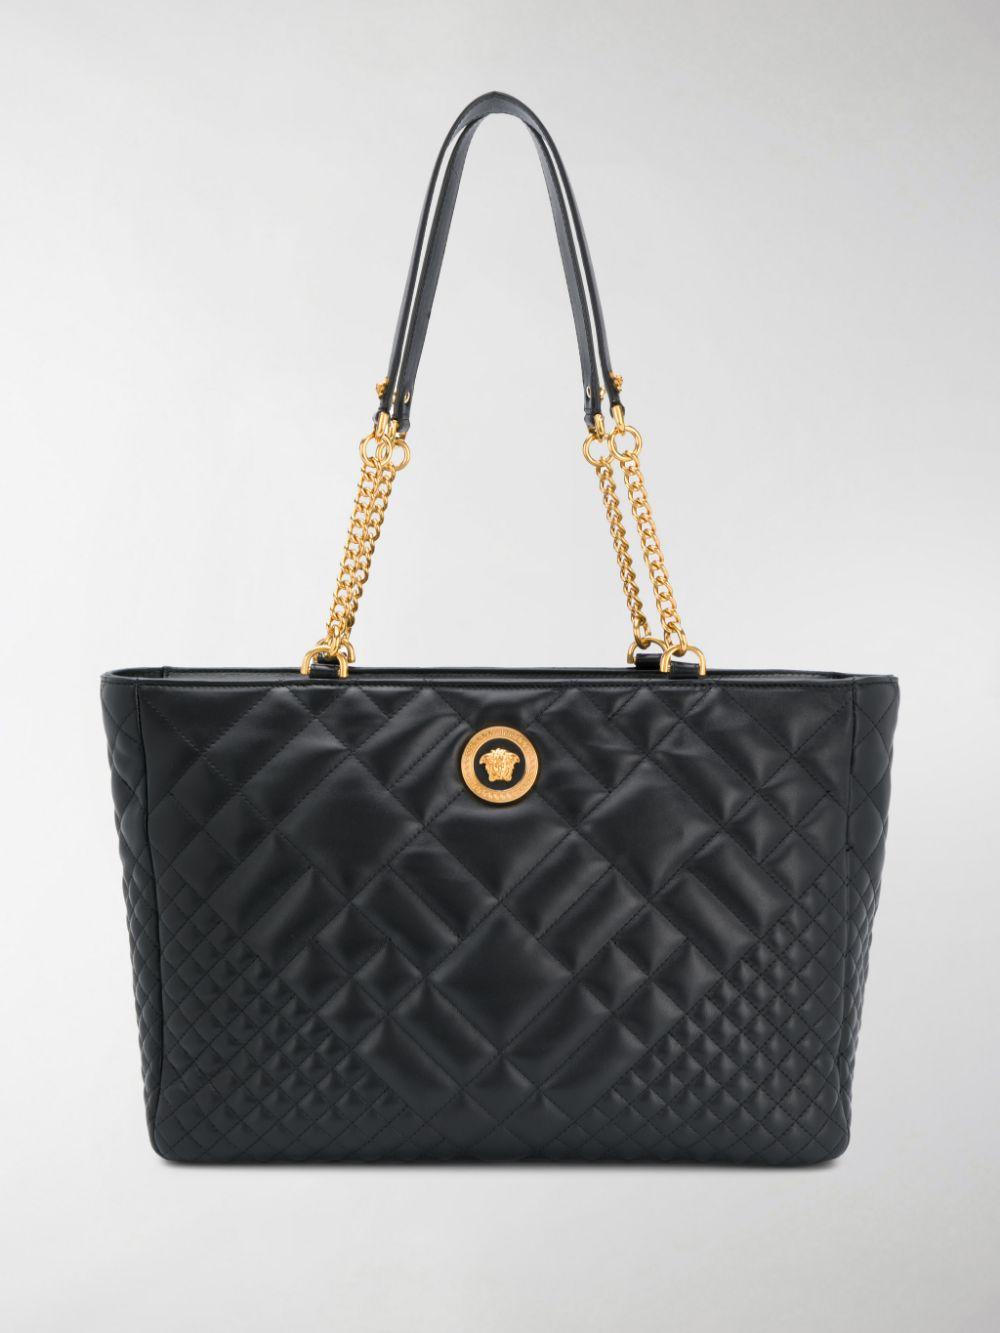 Versace Leather Medusa Quilted Tote Bag in Black - Lyst